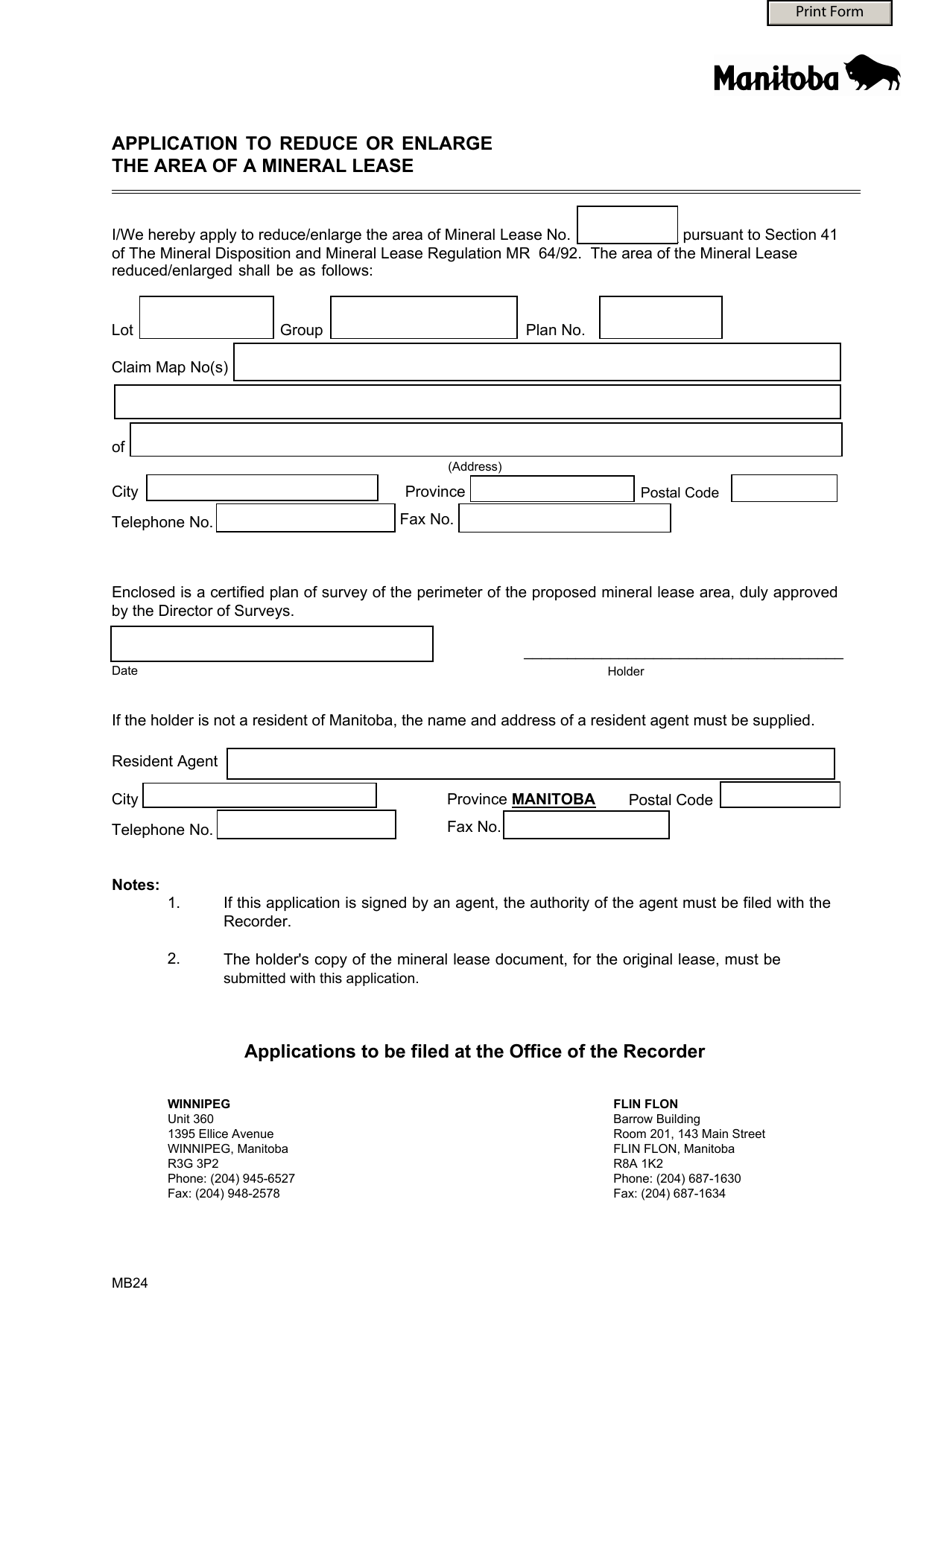 Form MB24 Application to Reduce or Enlarge the Area of a Mineral Lease - Manitoba, Canada, Page 1